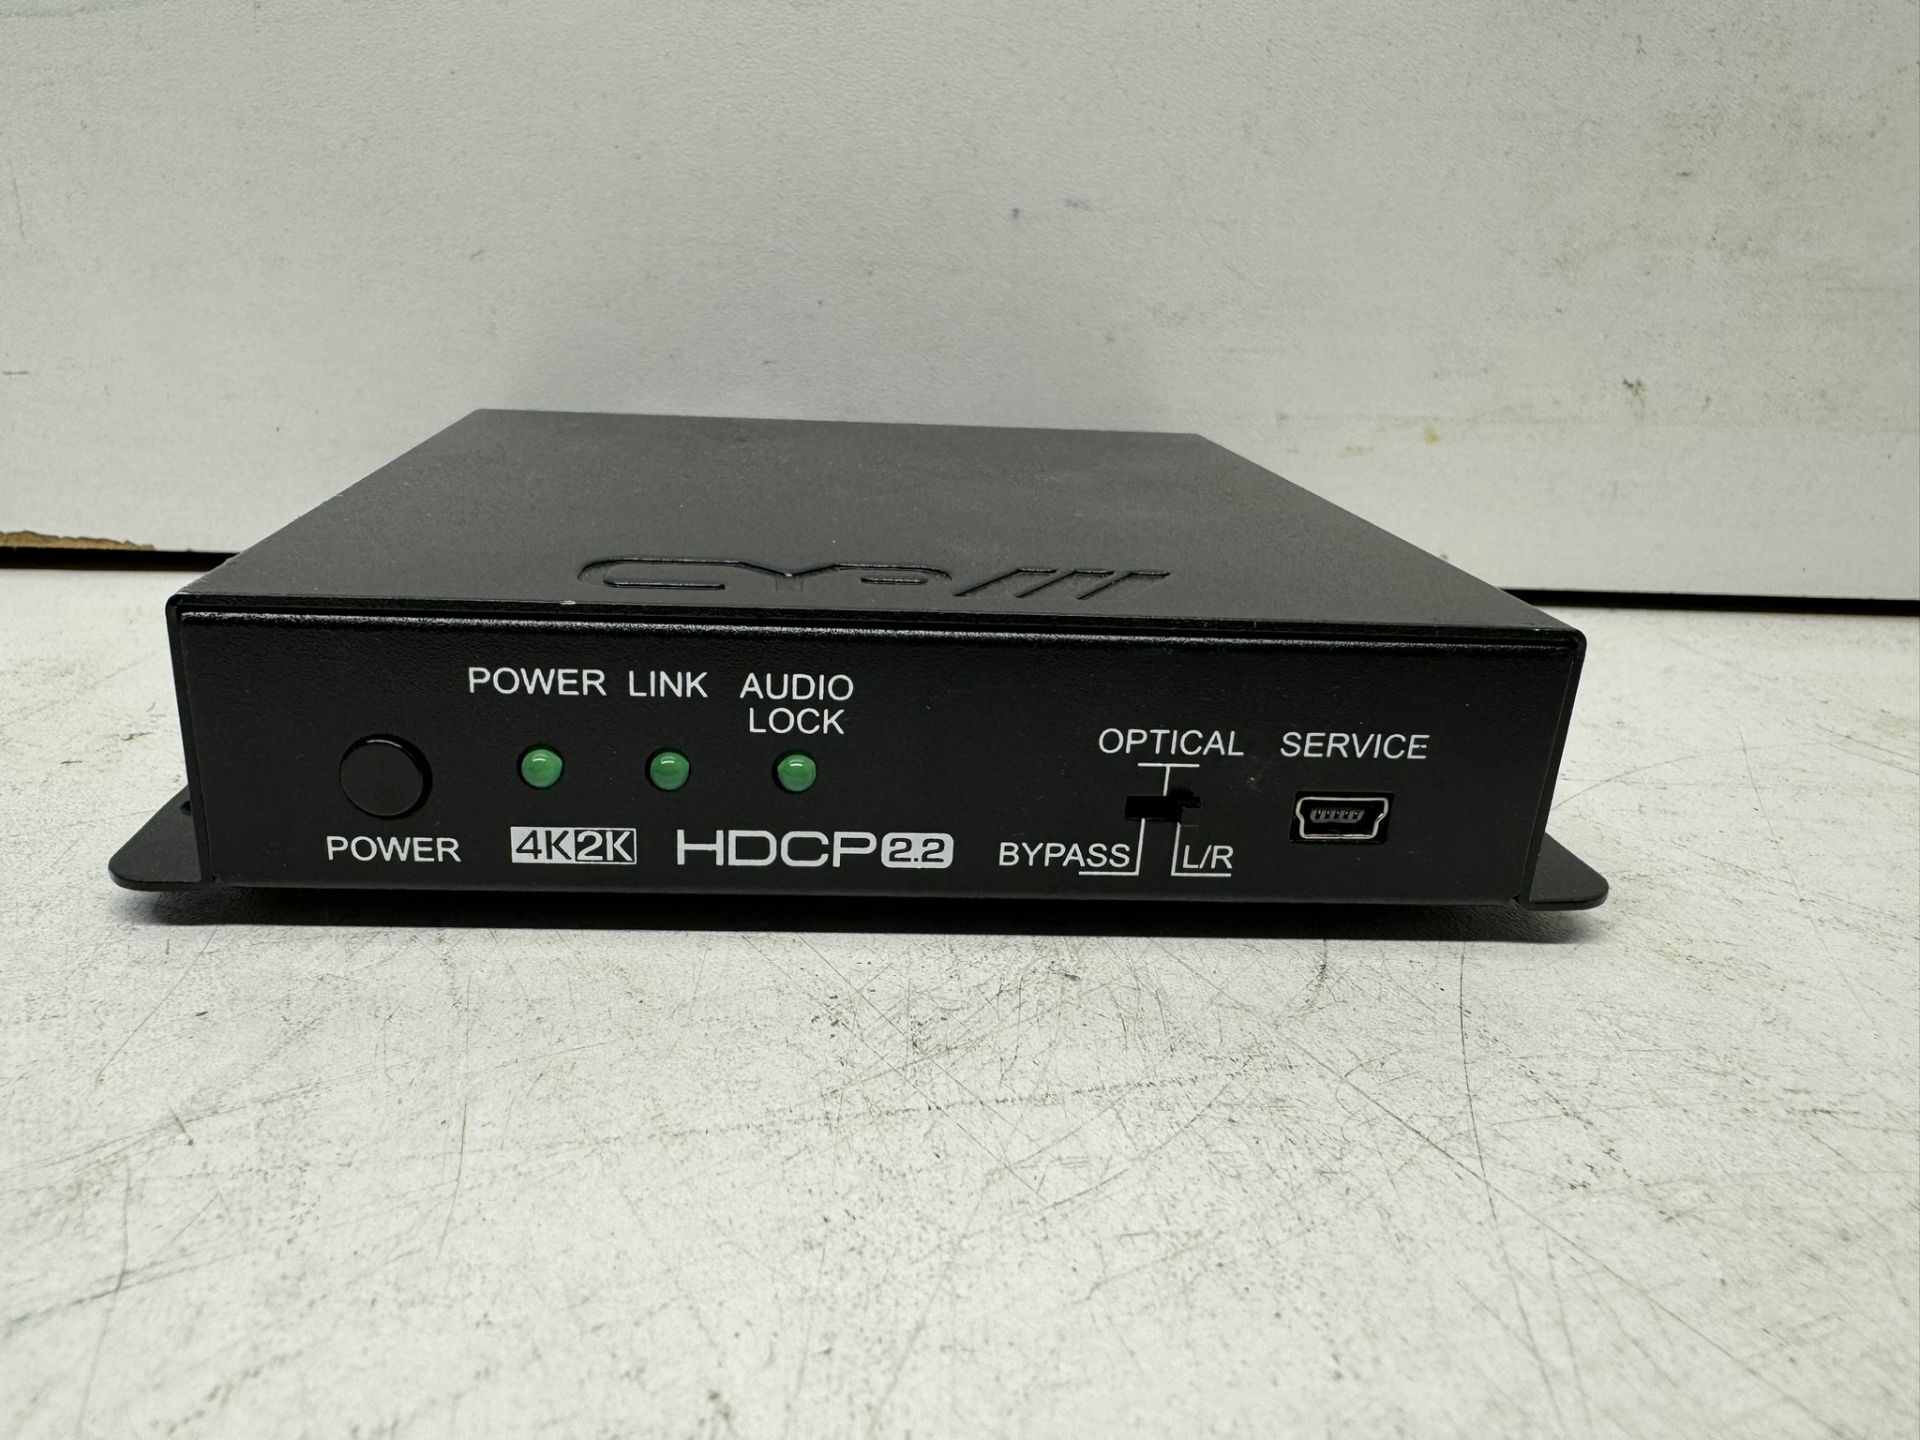 CYP AU-11CA-4K22 HDMI Audio Embedder with built-in Repeater - Image 2 of 4